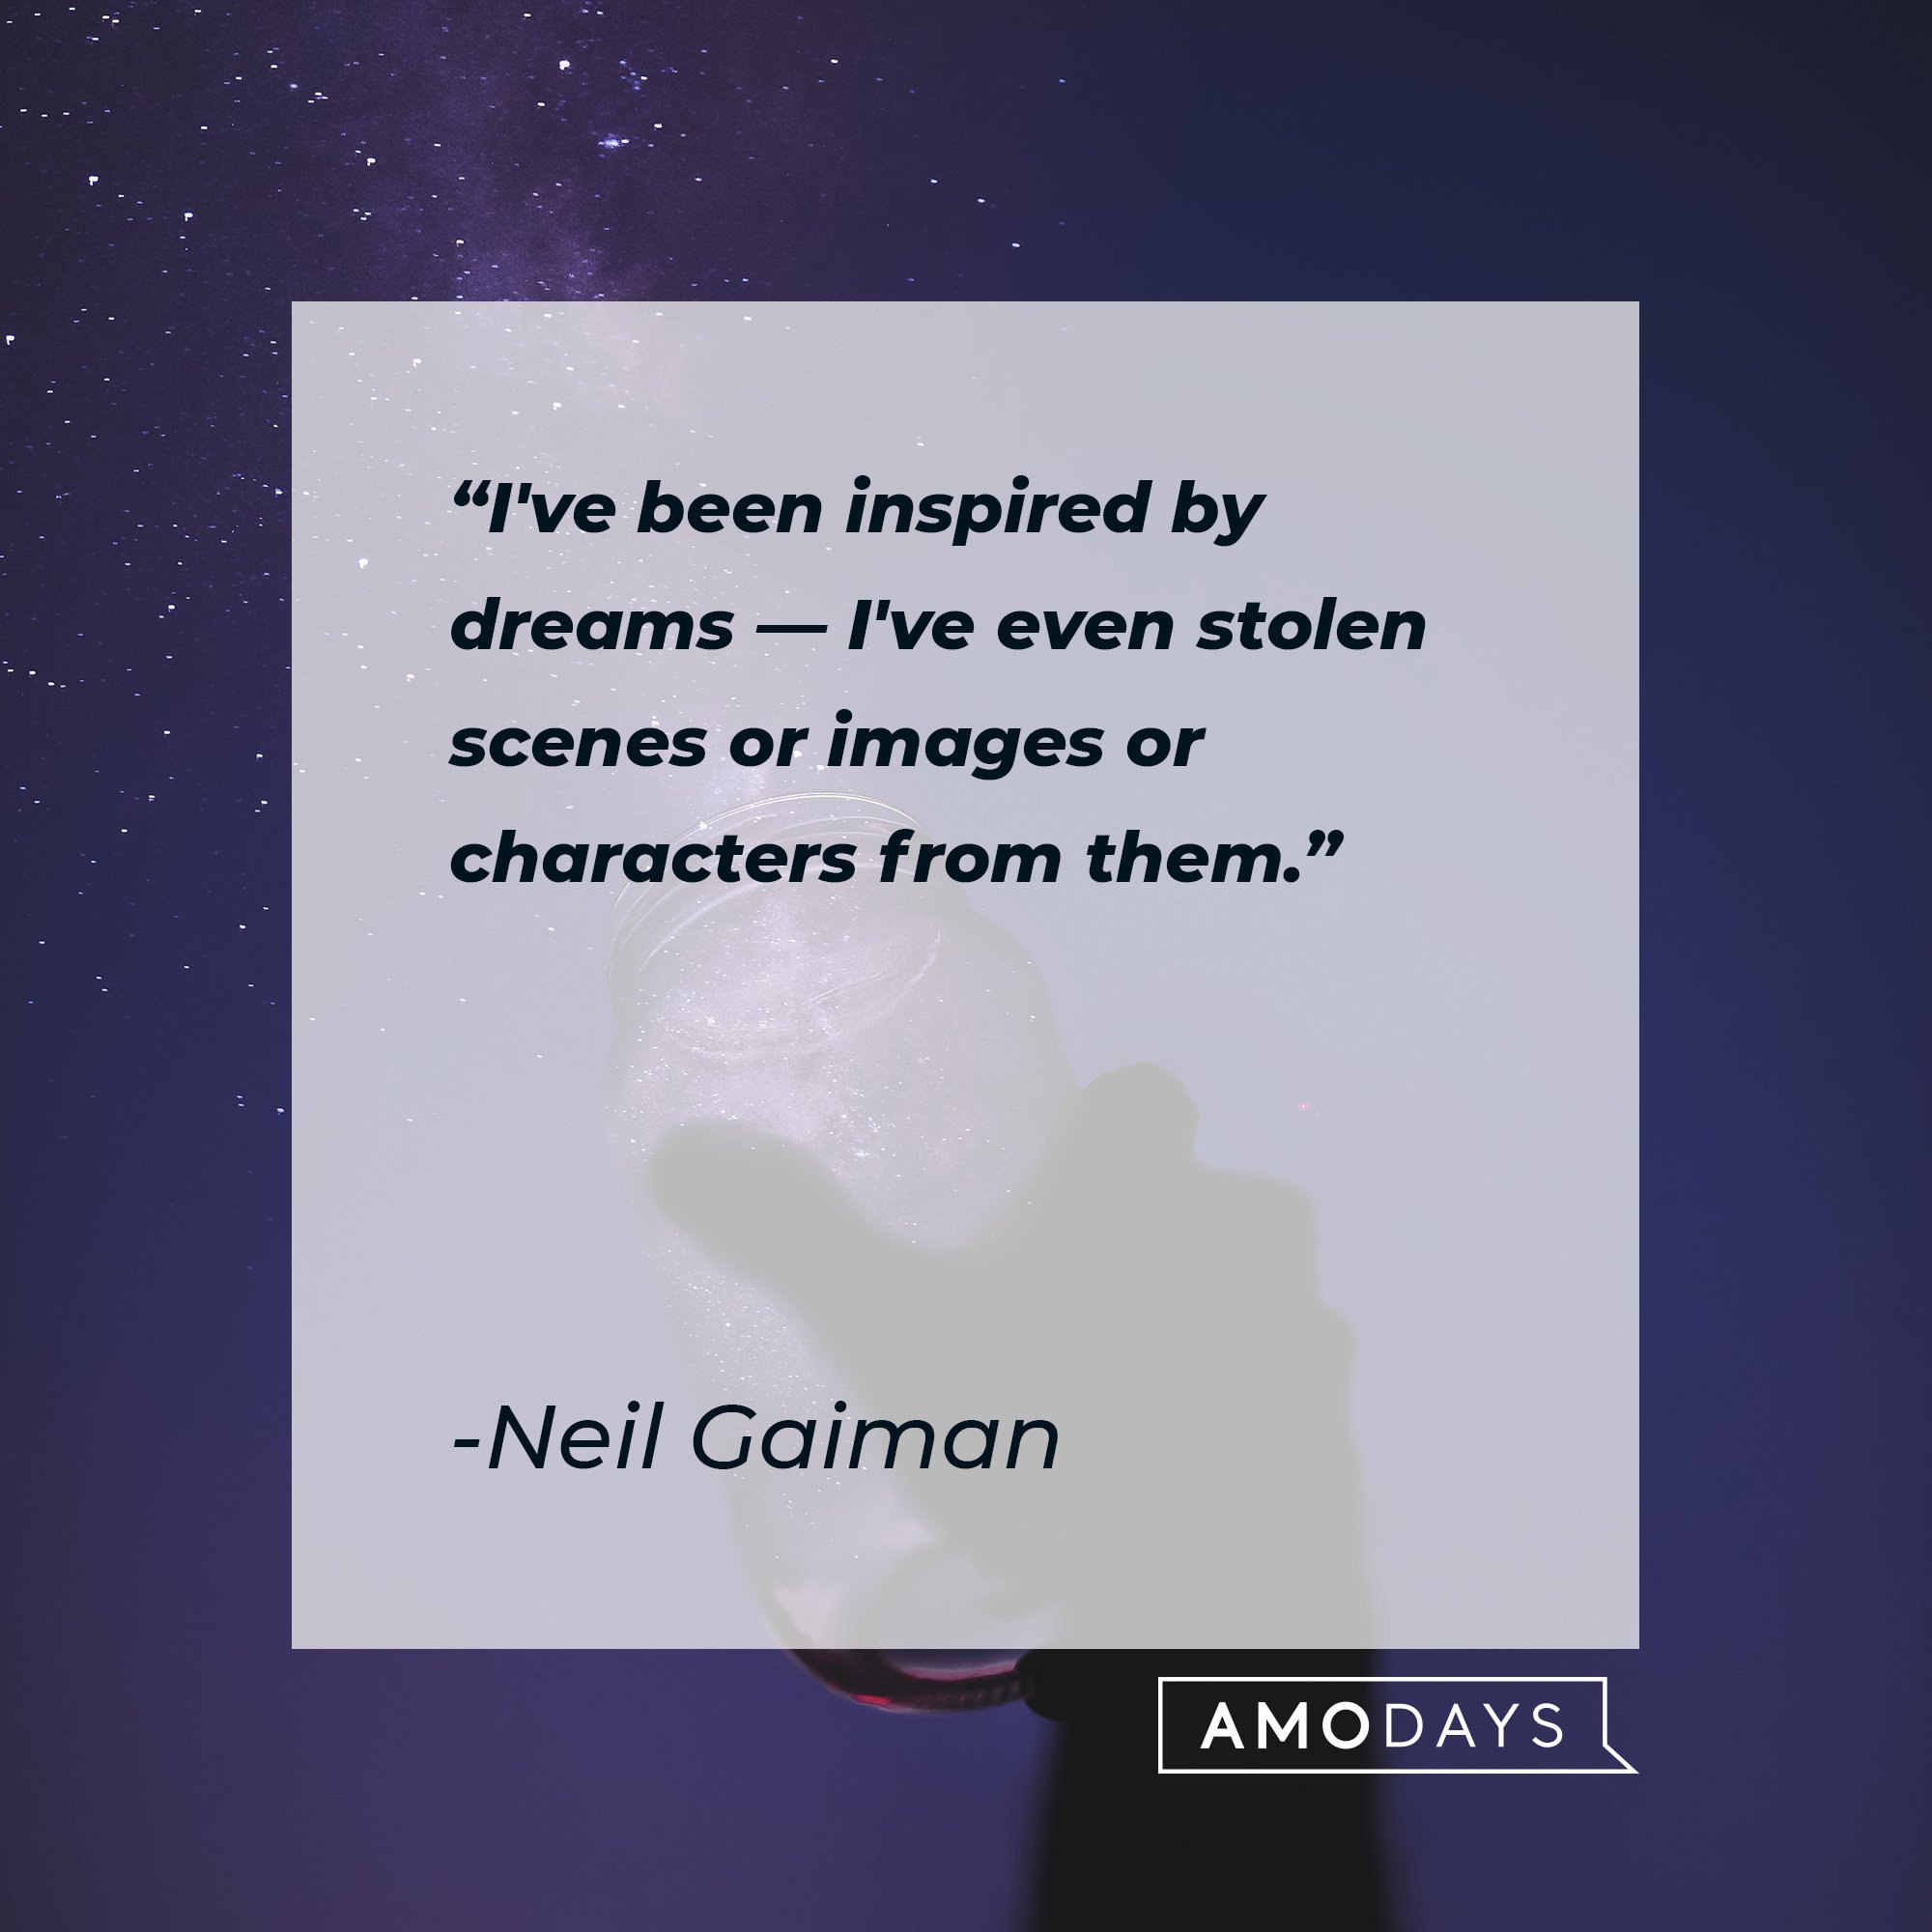 Neil Gaiman’s quote: "I've been inspired by dreams — I've even stolen scenes or images or characters from them." | Image: AmoDays